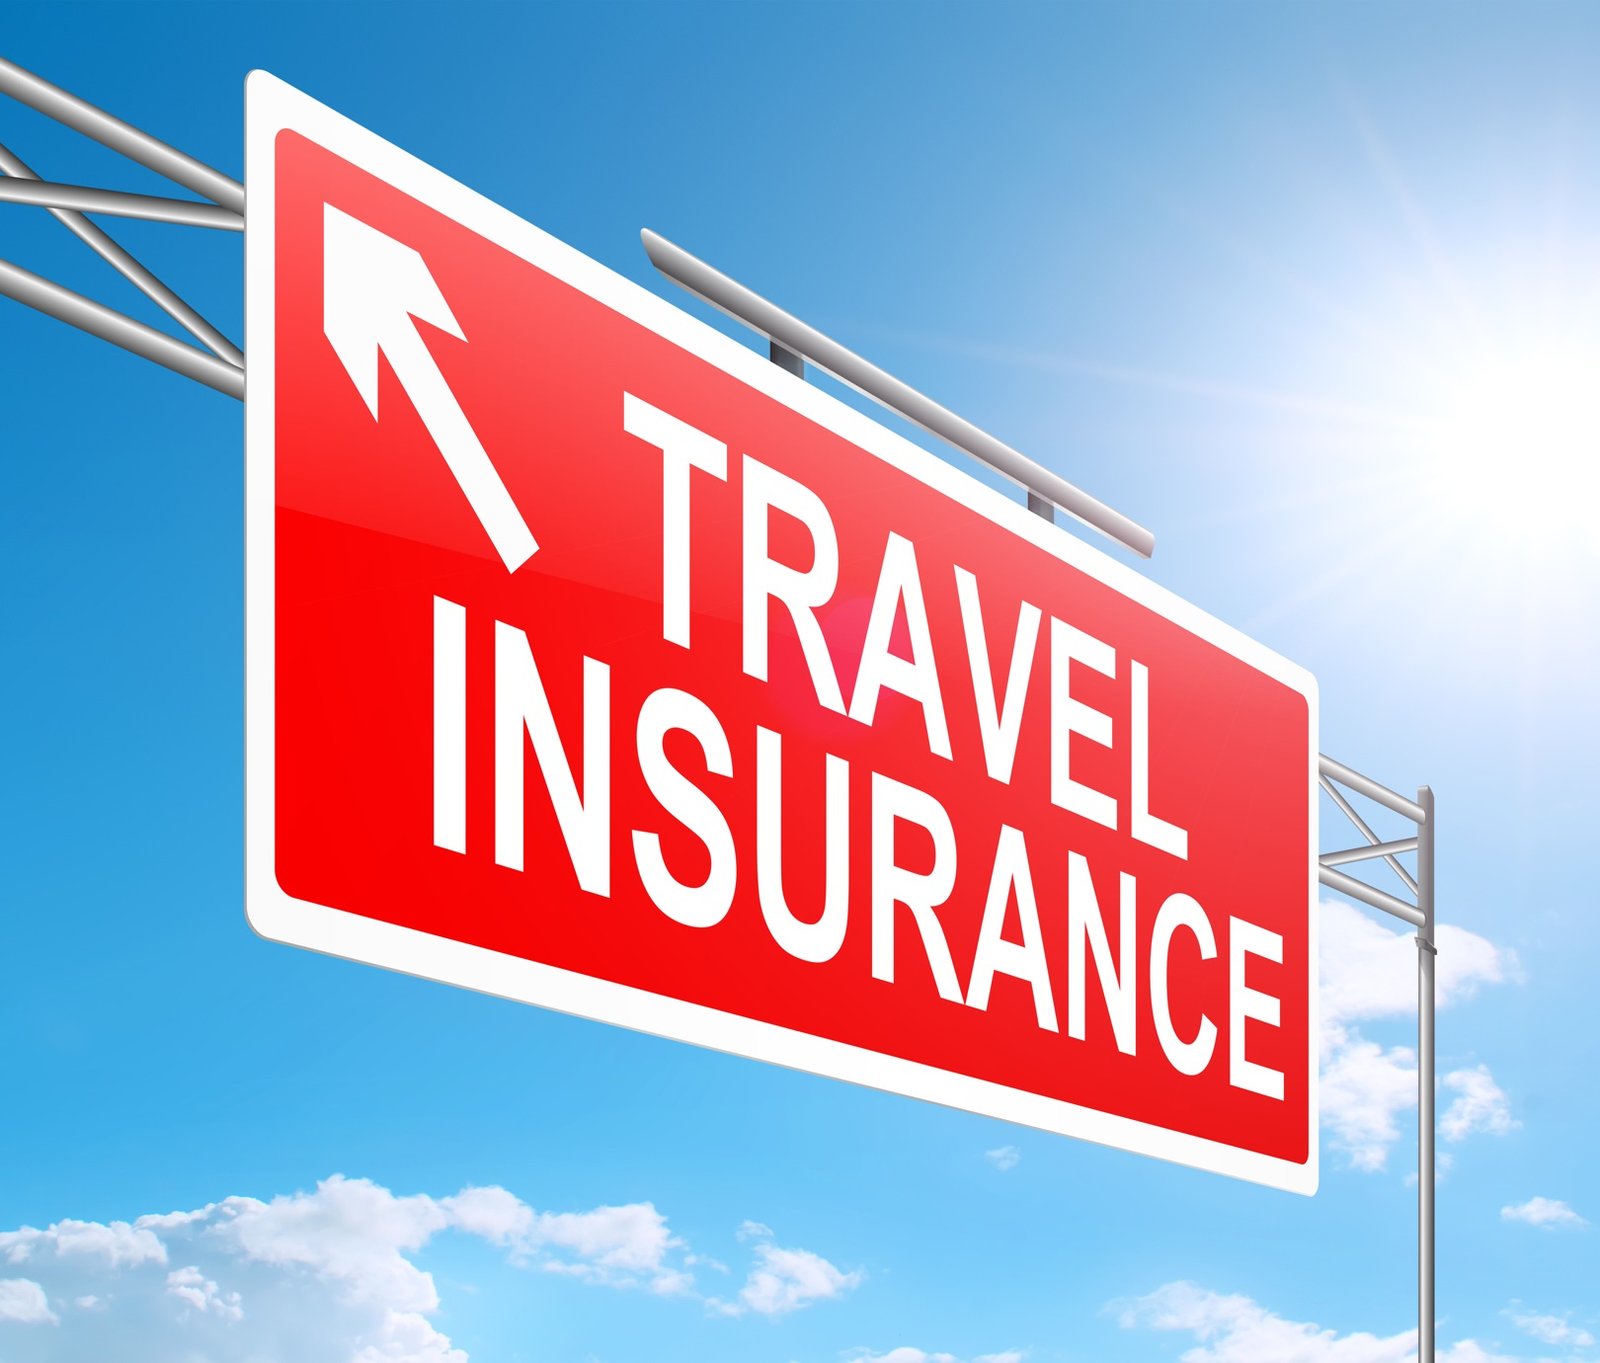 Feel secure with the best travel insurance coverage